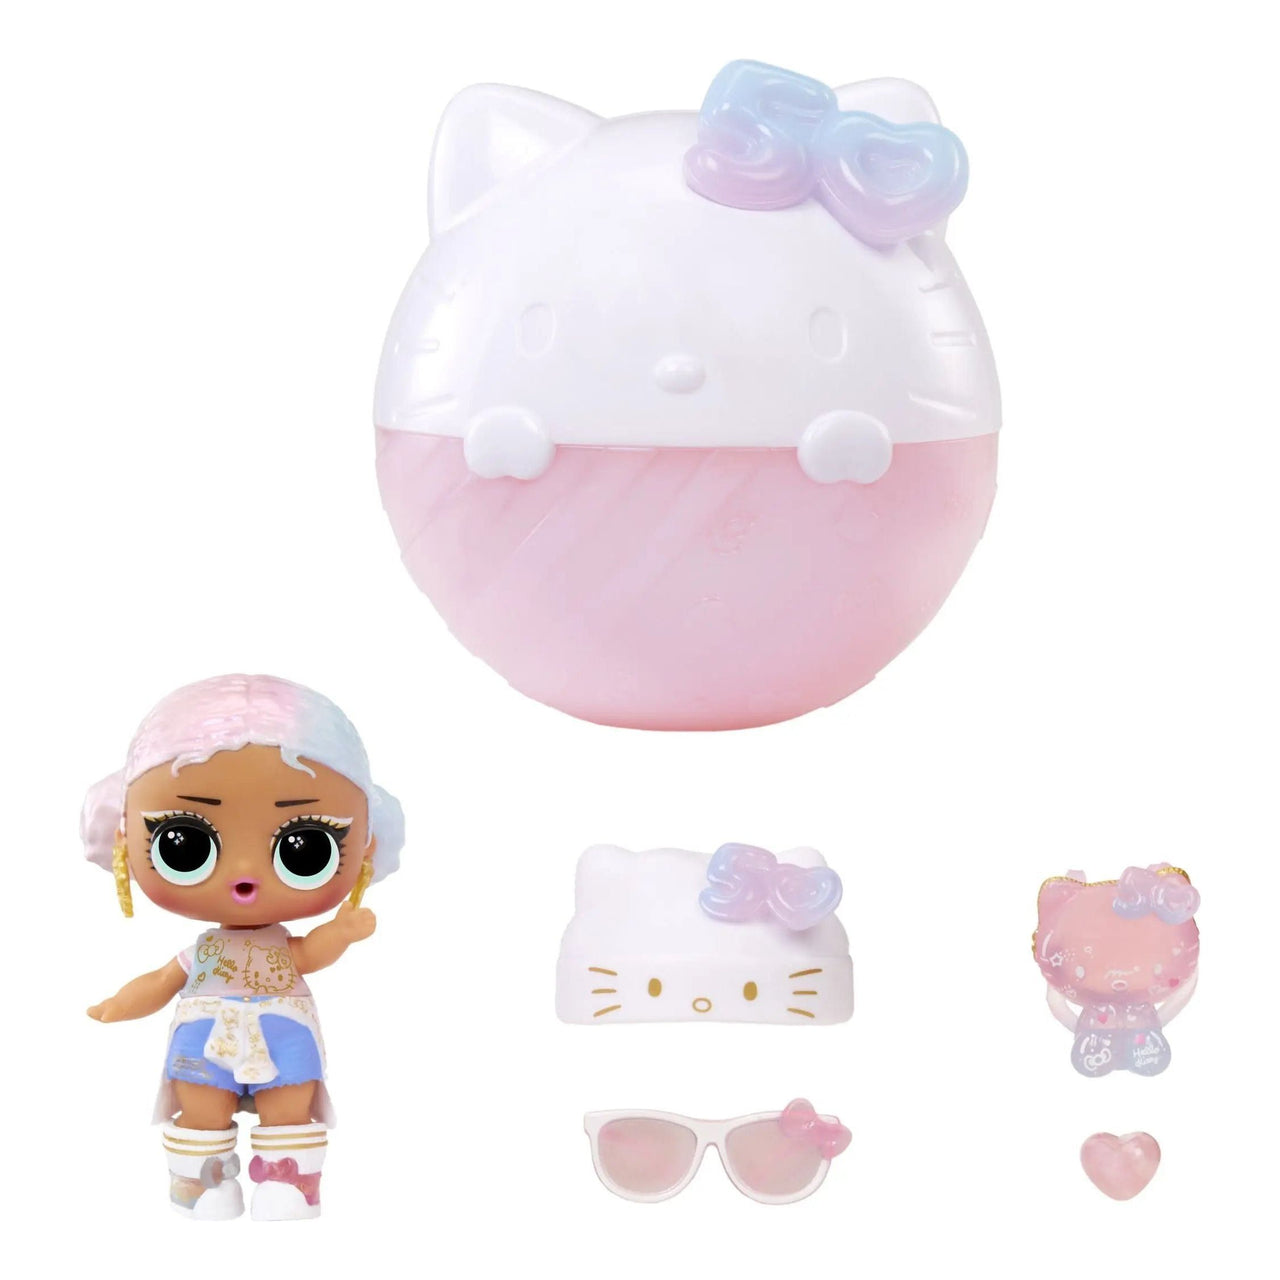 L.O.L. Surprise! Loves Hello Kitty Crystal Cutie Doll LOL Surprise